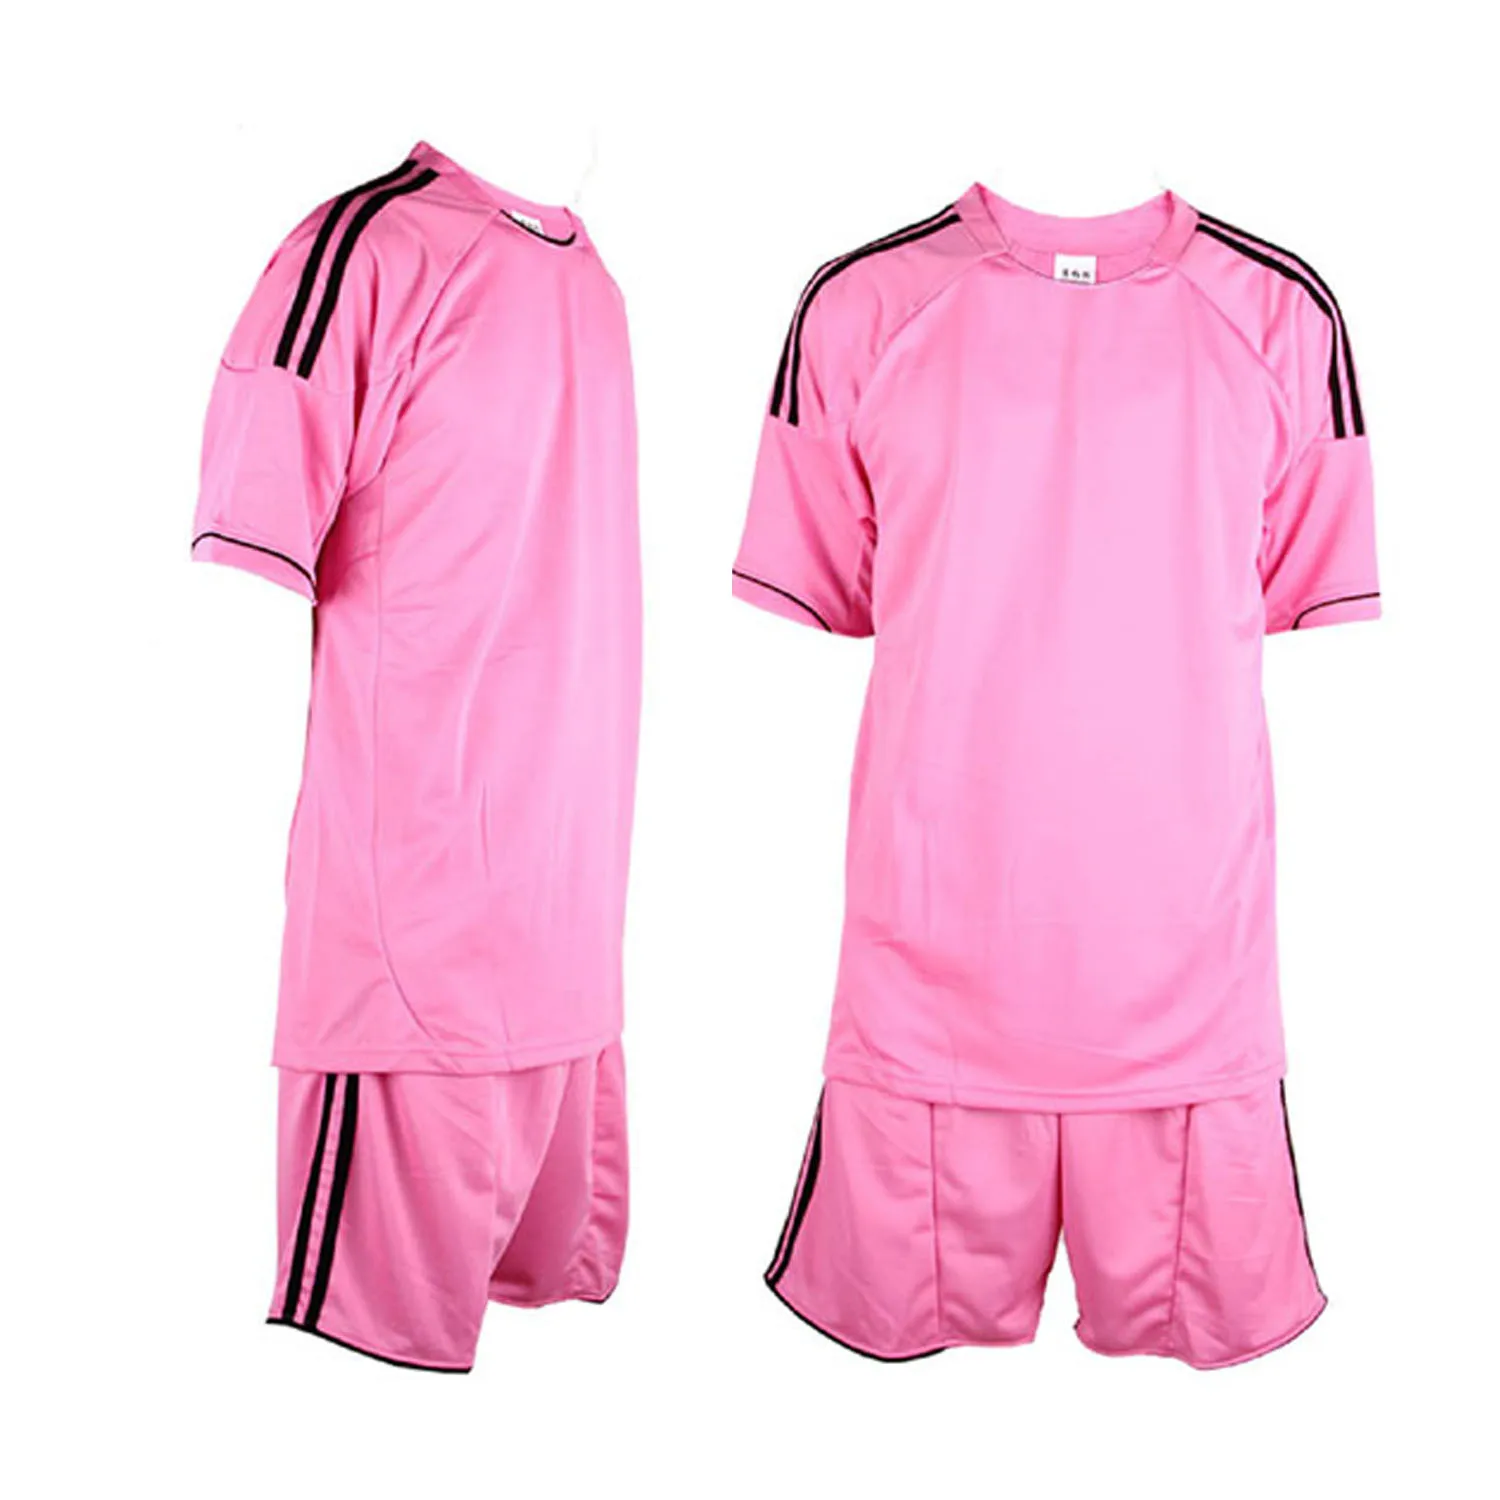 soccer jersey in Cheap Price on Alibaba.com